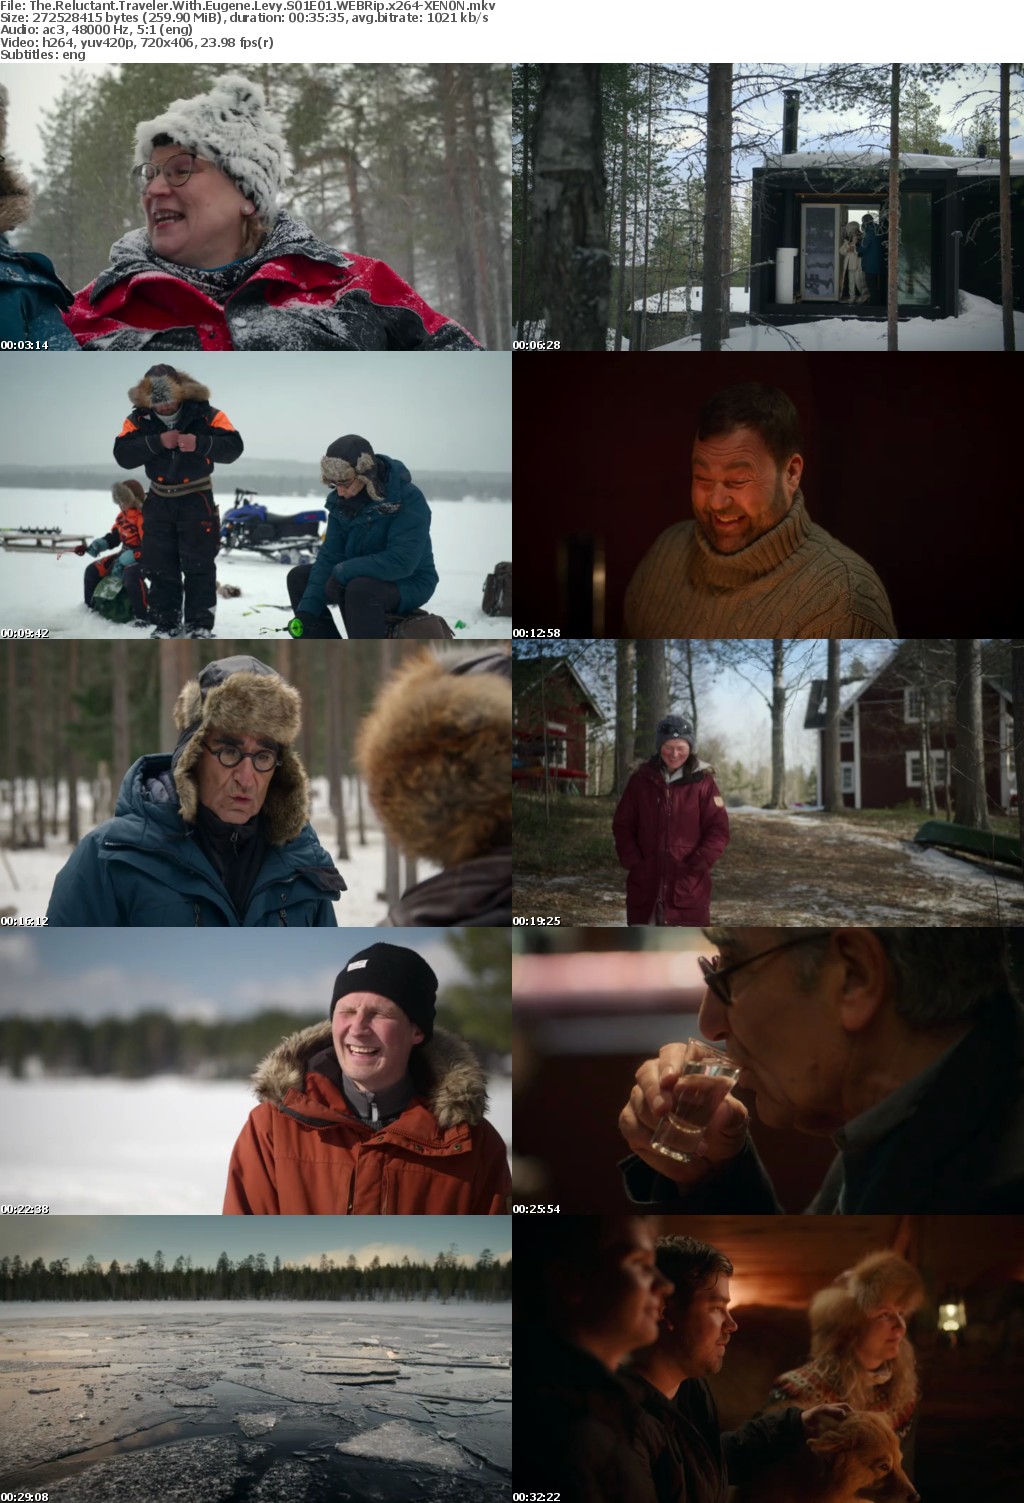 The Reluctant Traveler With Eugene Levy S01E01 WEBRip x264-XEN0N